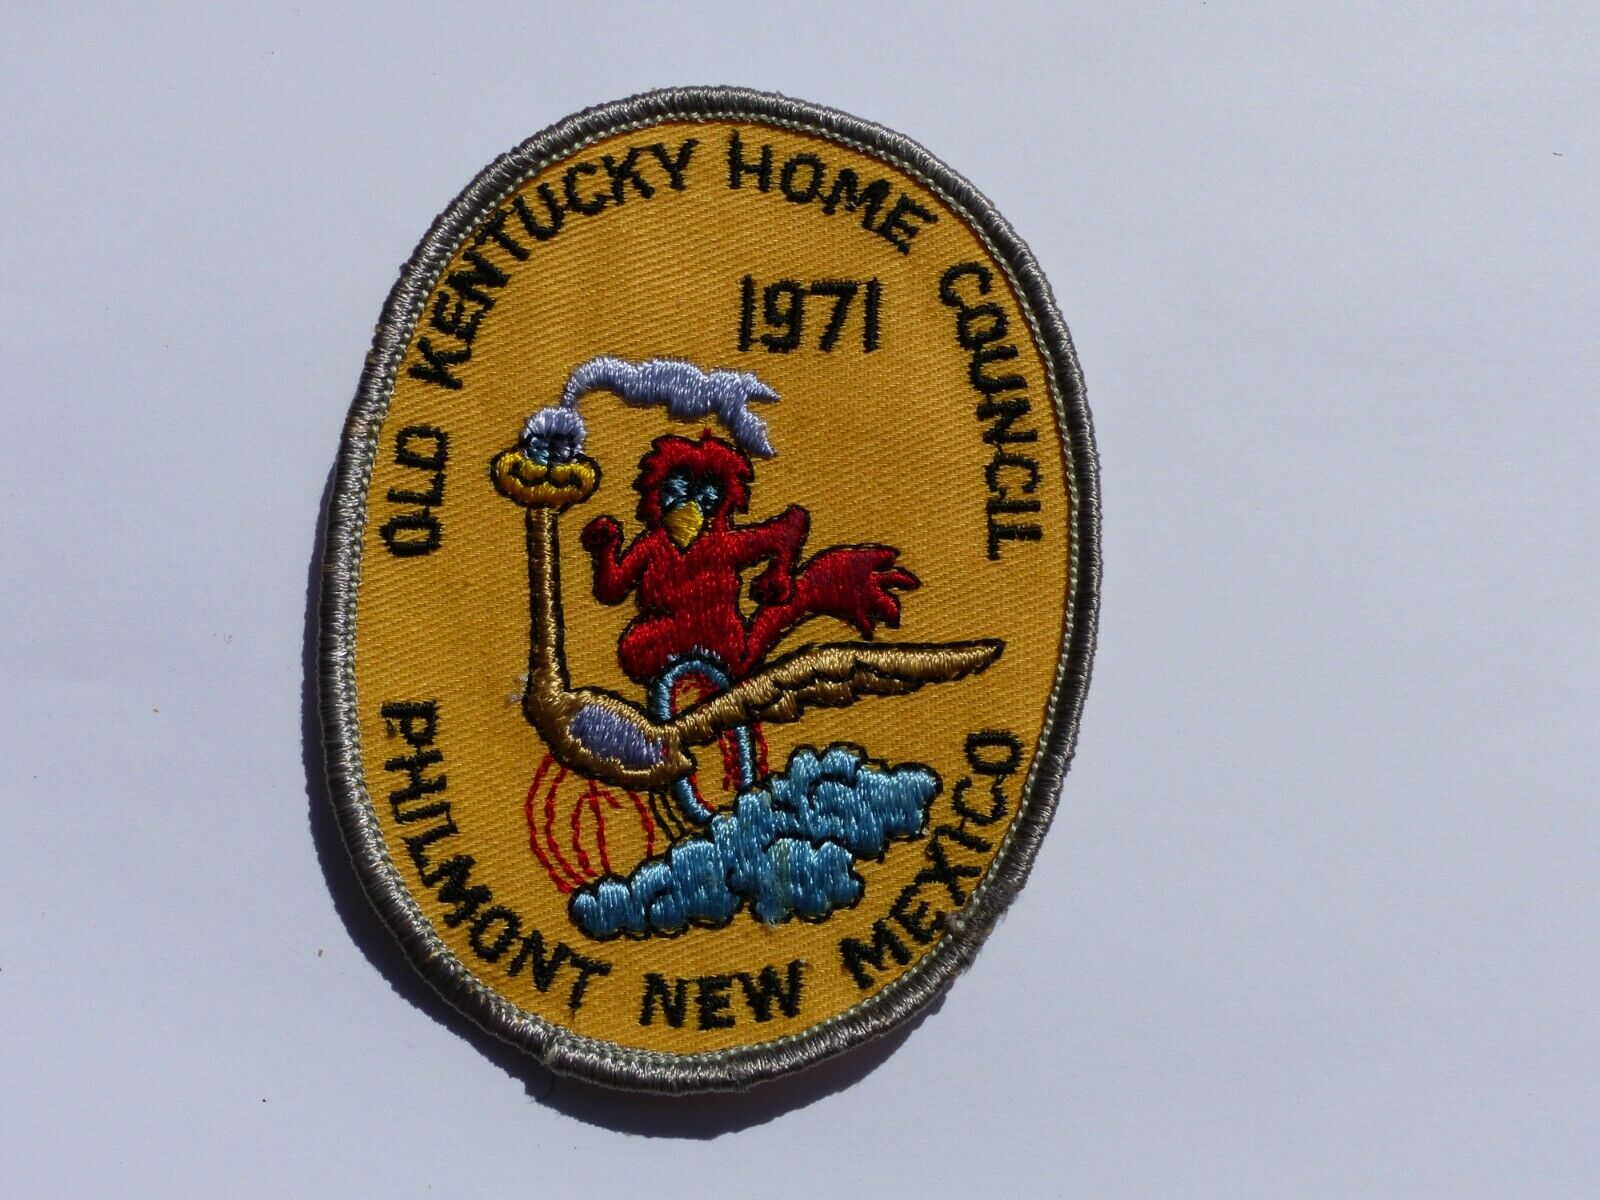 Used 1971 Philmont Scout Ranch Old Kentucky Home Council Boy Scout Bsa Patch